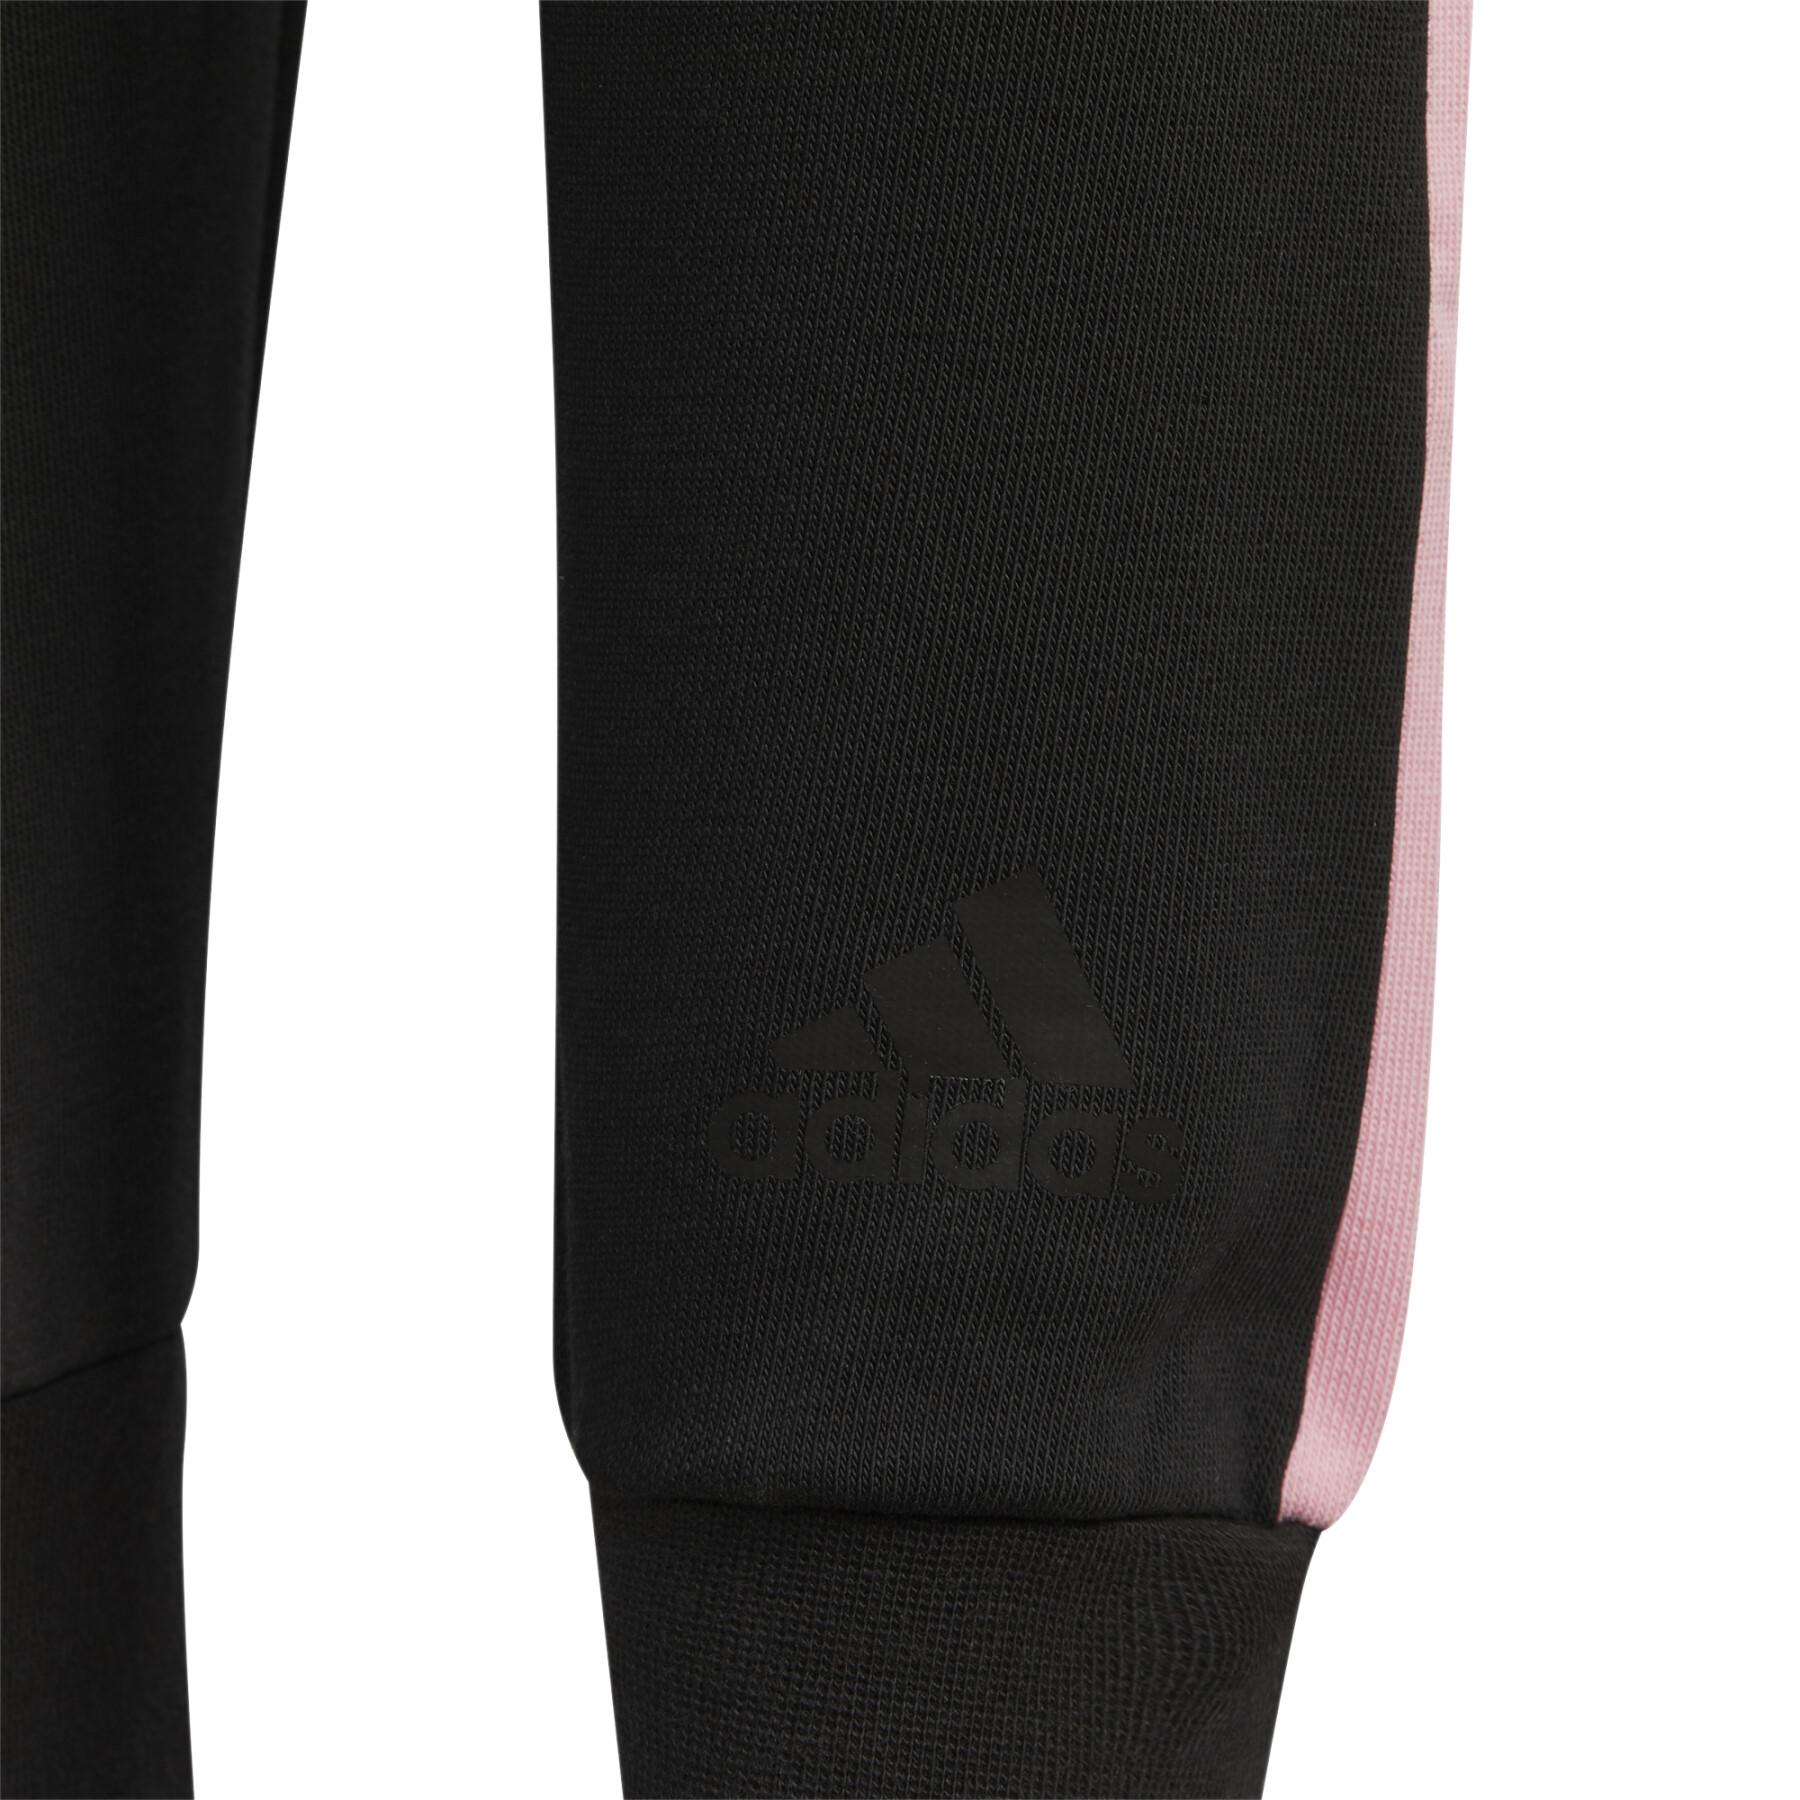 Children's trousers adidas Badge of Sport Knit